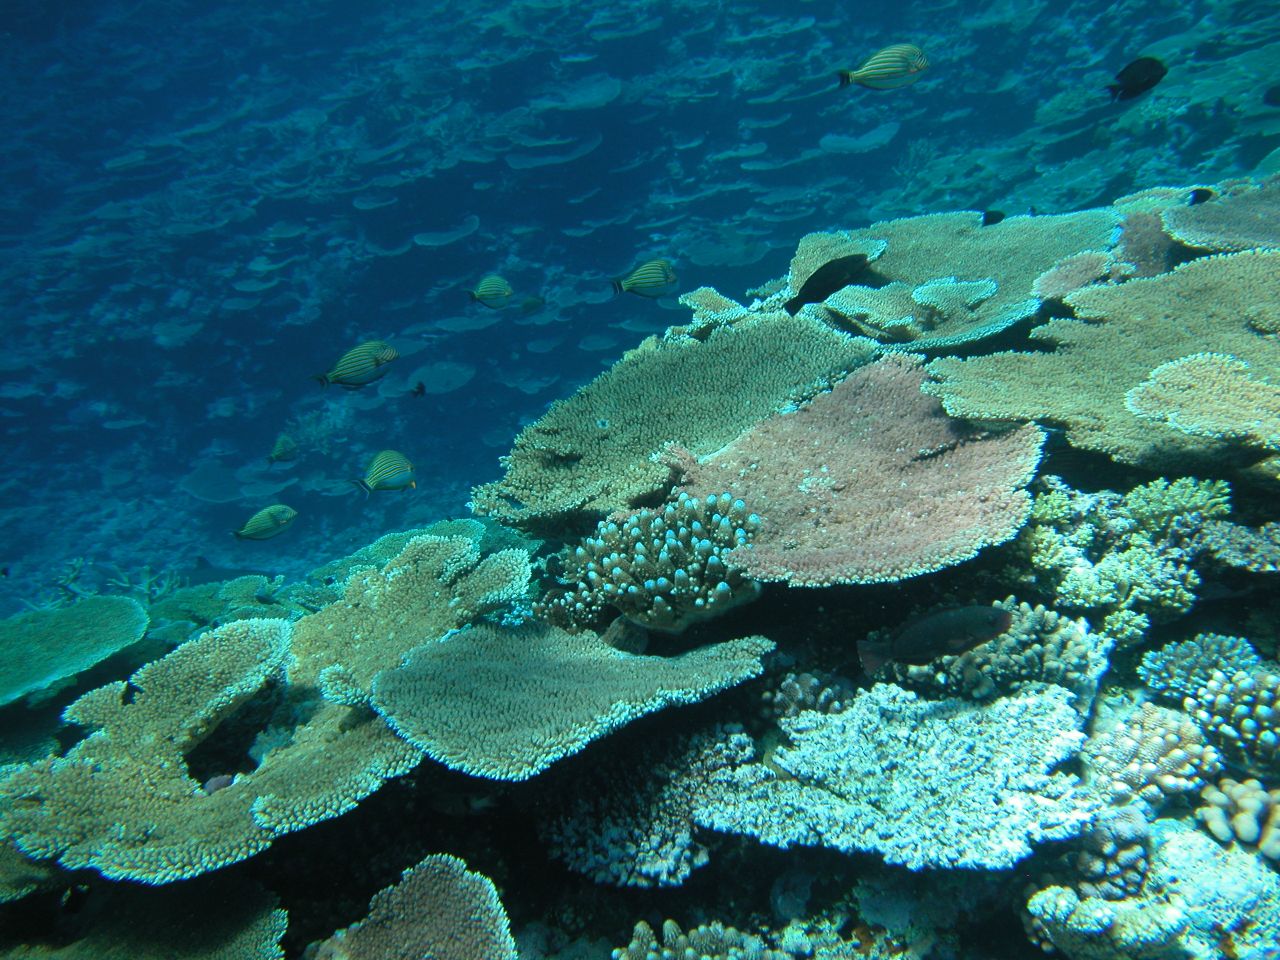 A report in October 2012 revealed that half of the coral coverage on the Great Barrier Reef had disappeared over the past 27 years due to a combination of factors: cyclones, the crown-of-thorns starfish and coral bleaching.